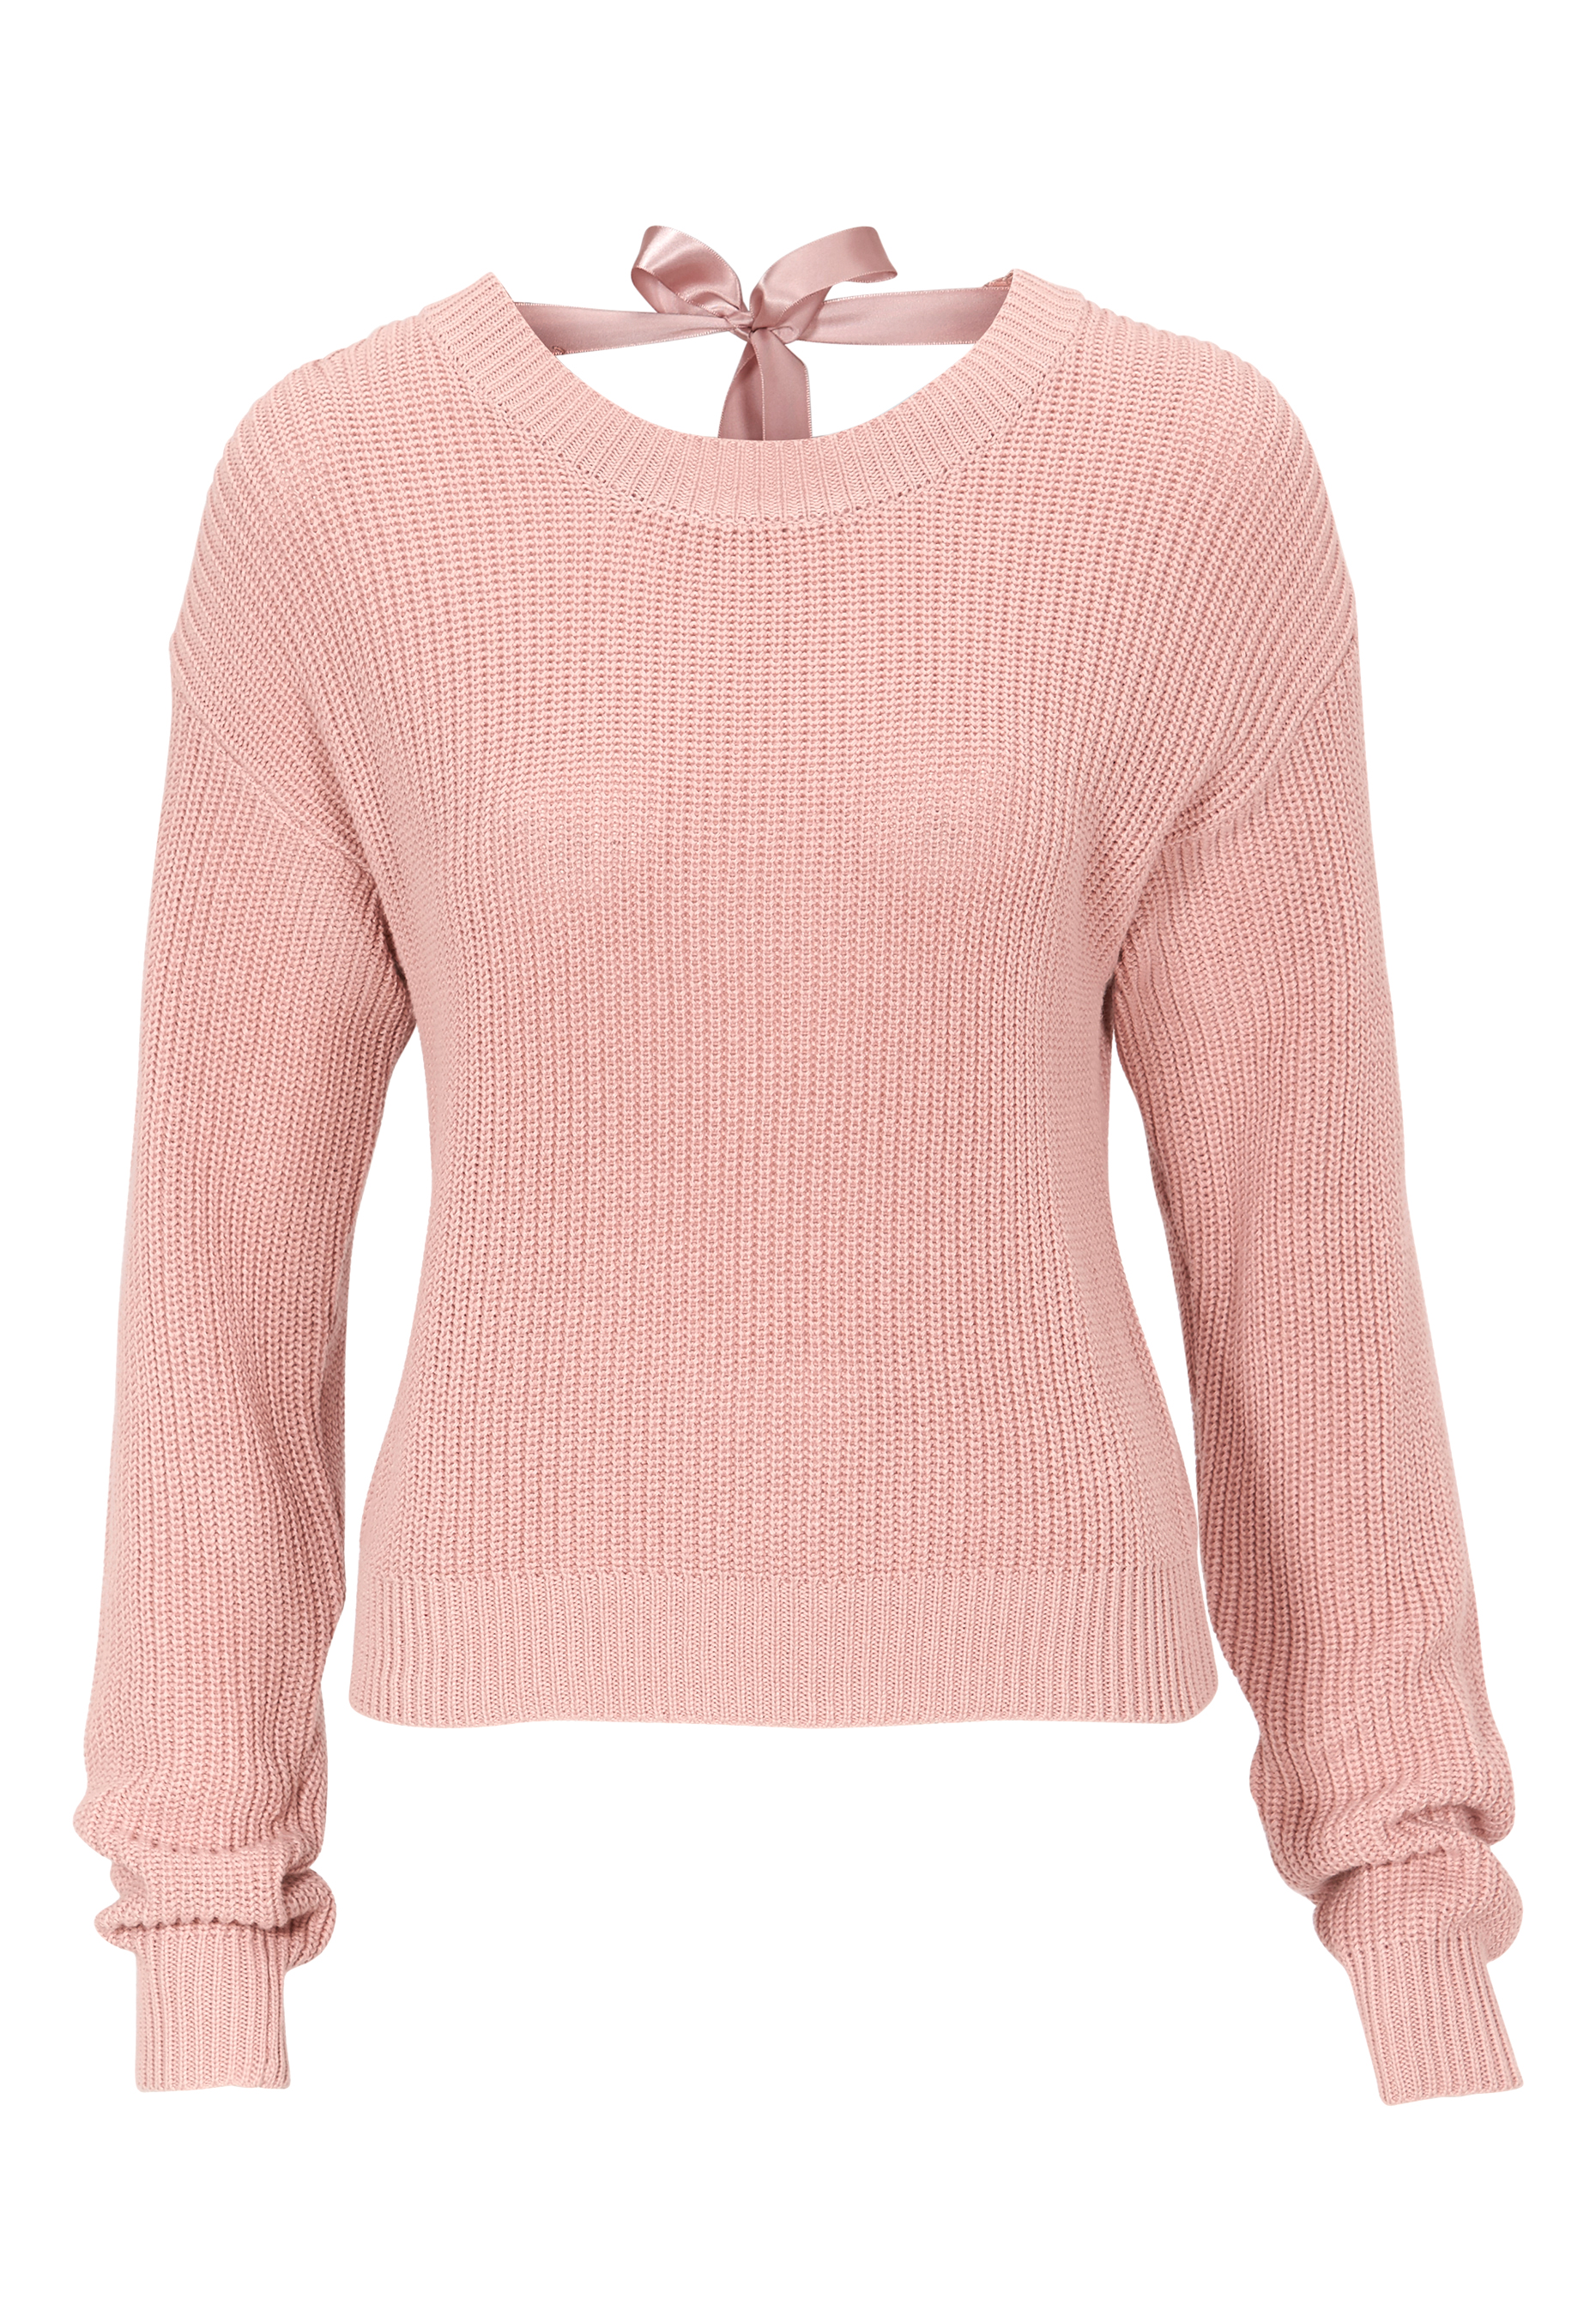 BUBBLEROOM Callie lace neck knitted sweater Dusty pink - Bubbleroom